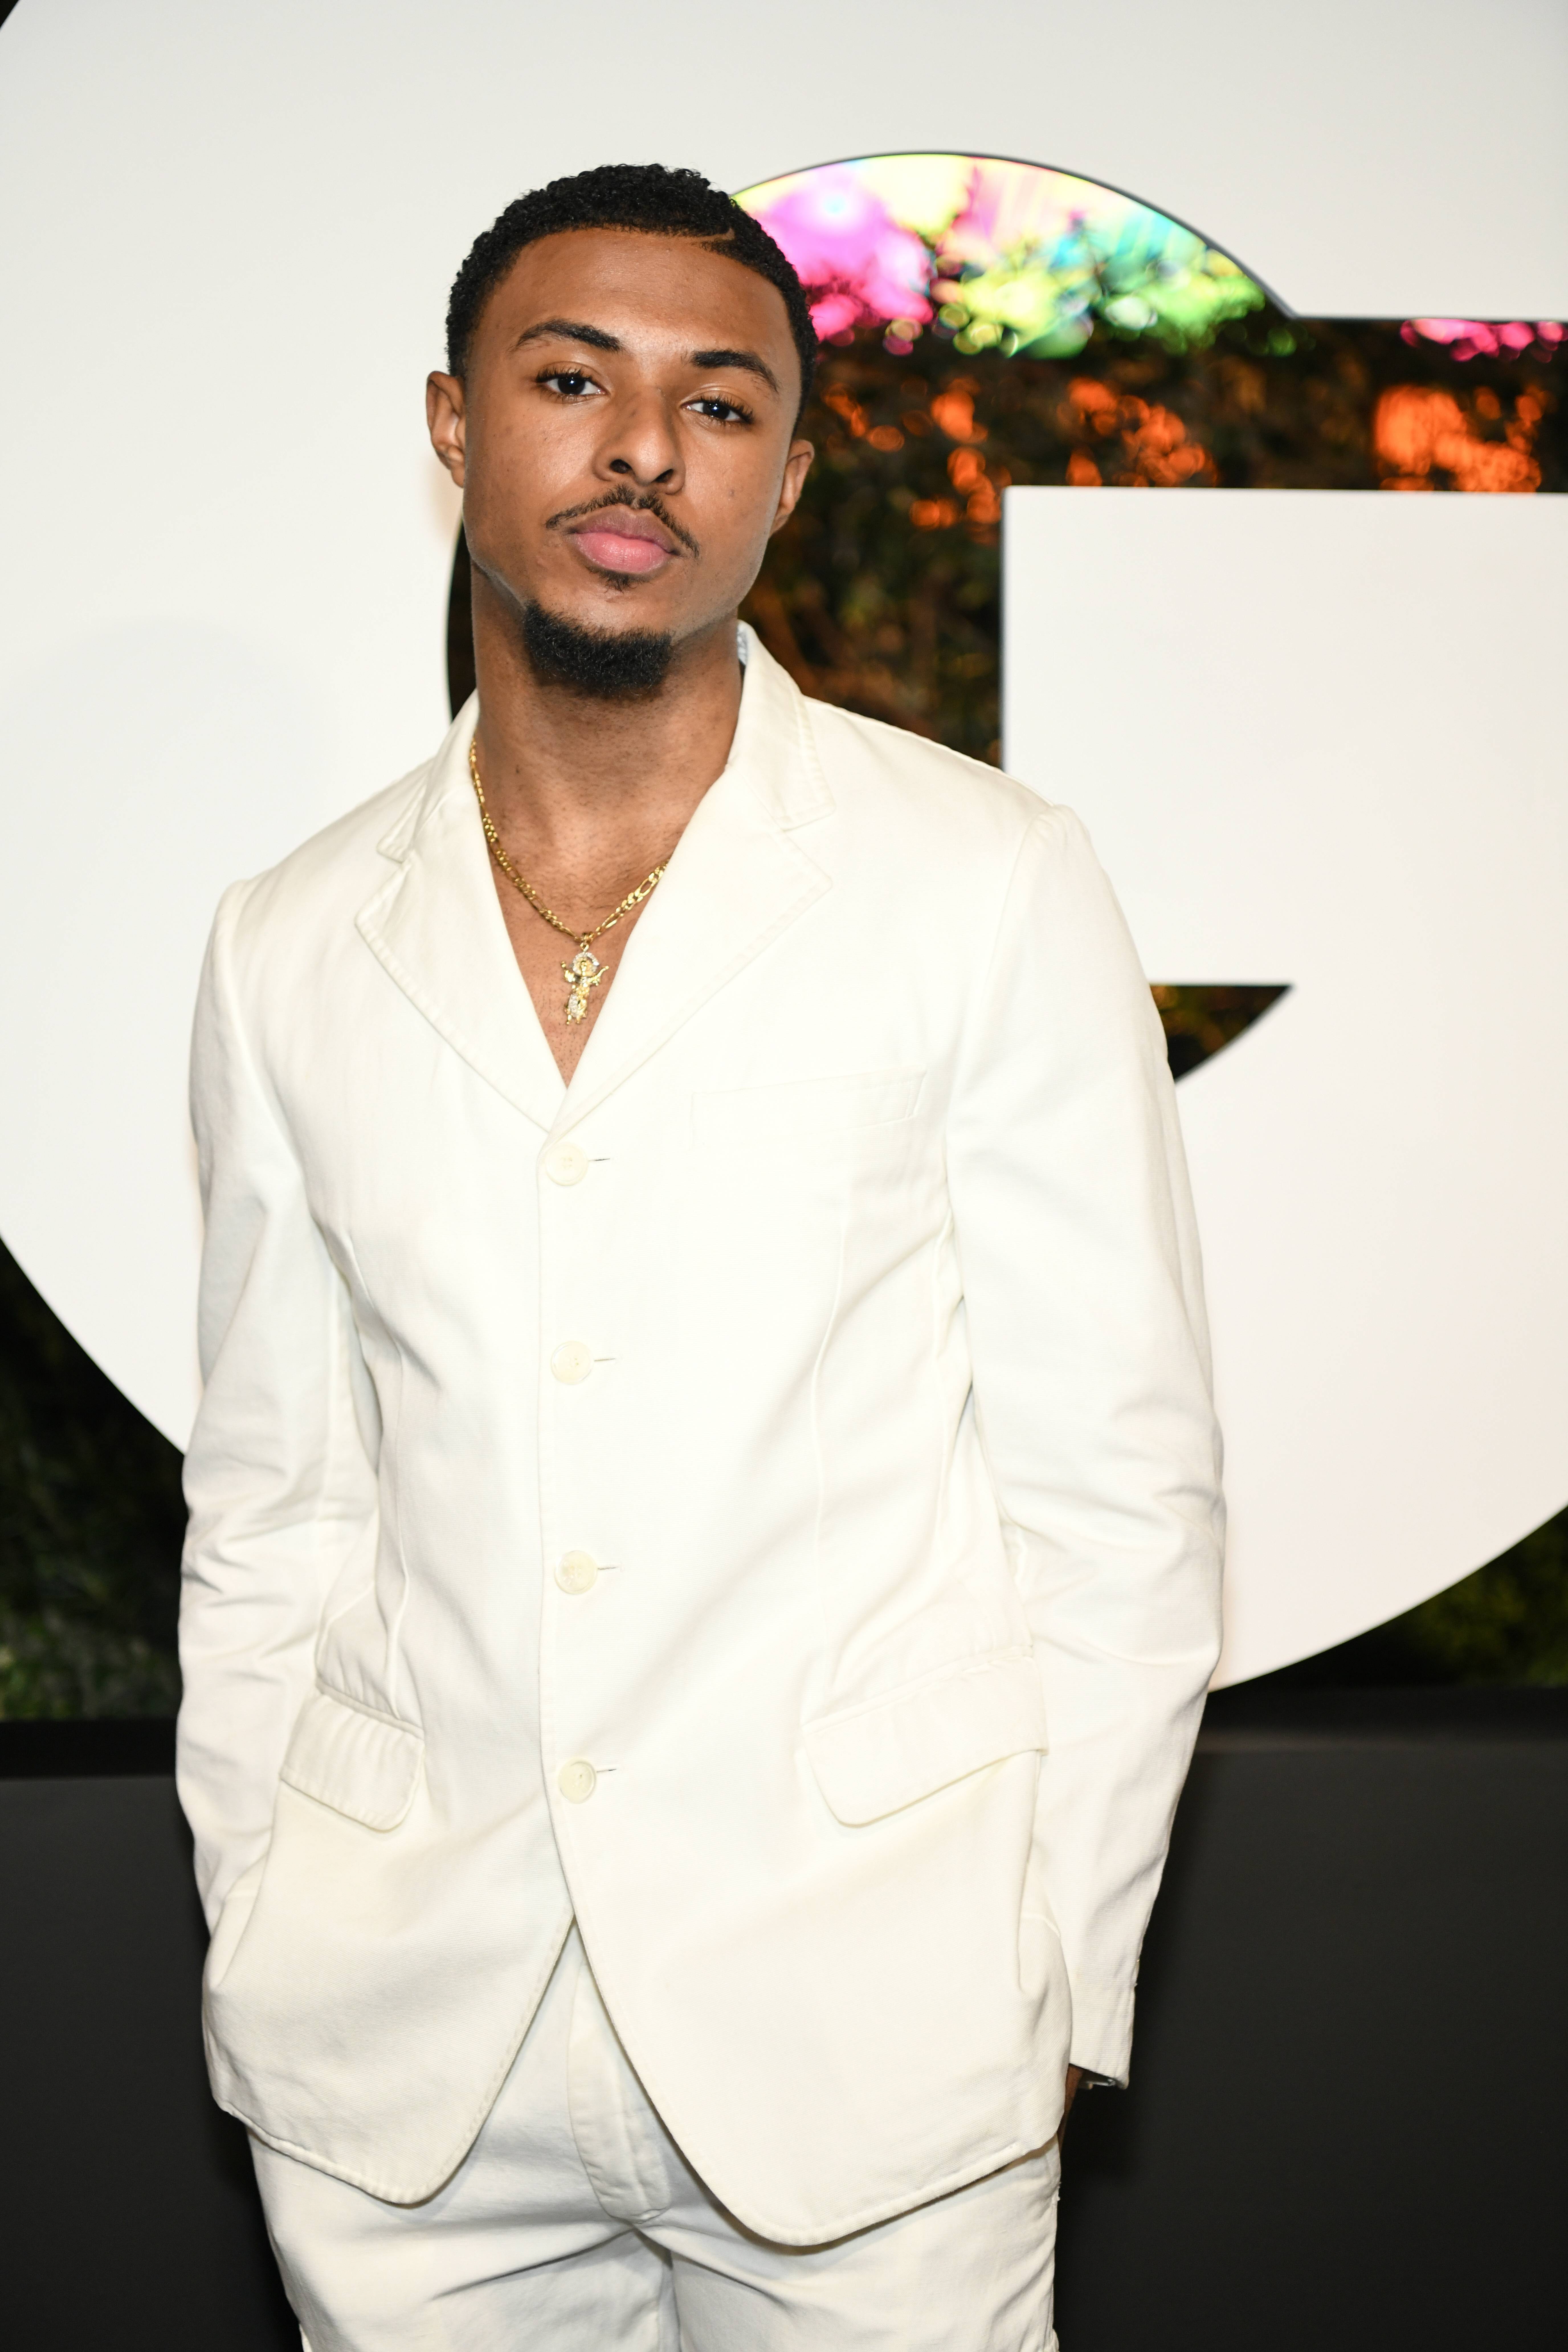 WEST HOLLYWOOD, CALIFORNIA - DECEMBER 05: Diggy Simmons arrives at the 2019 GQ Men Of The Year event at The West Hollywood Edition on December 05, 2019 in West Hollywood, California. (Photo by Morgan Lieberman/FilmMagic)